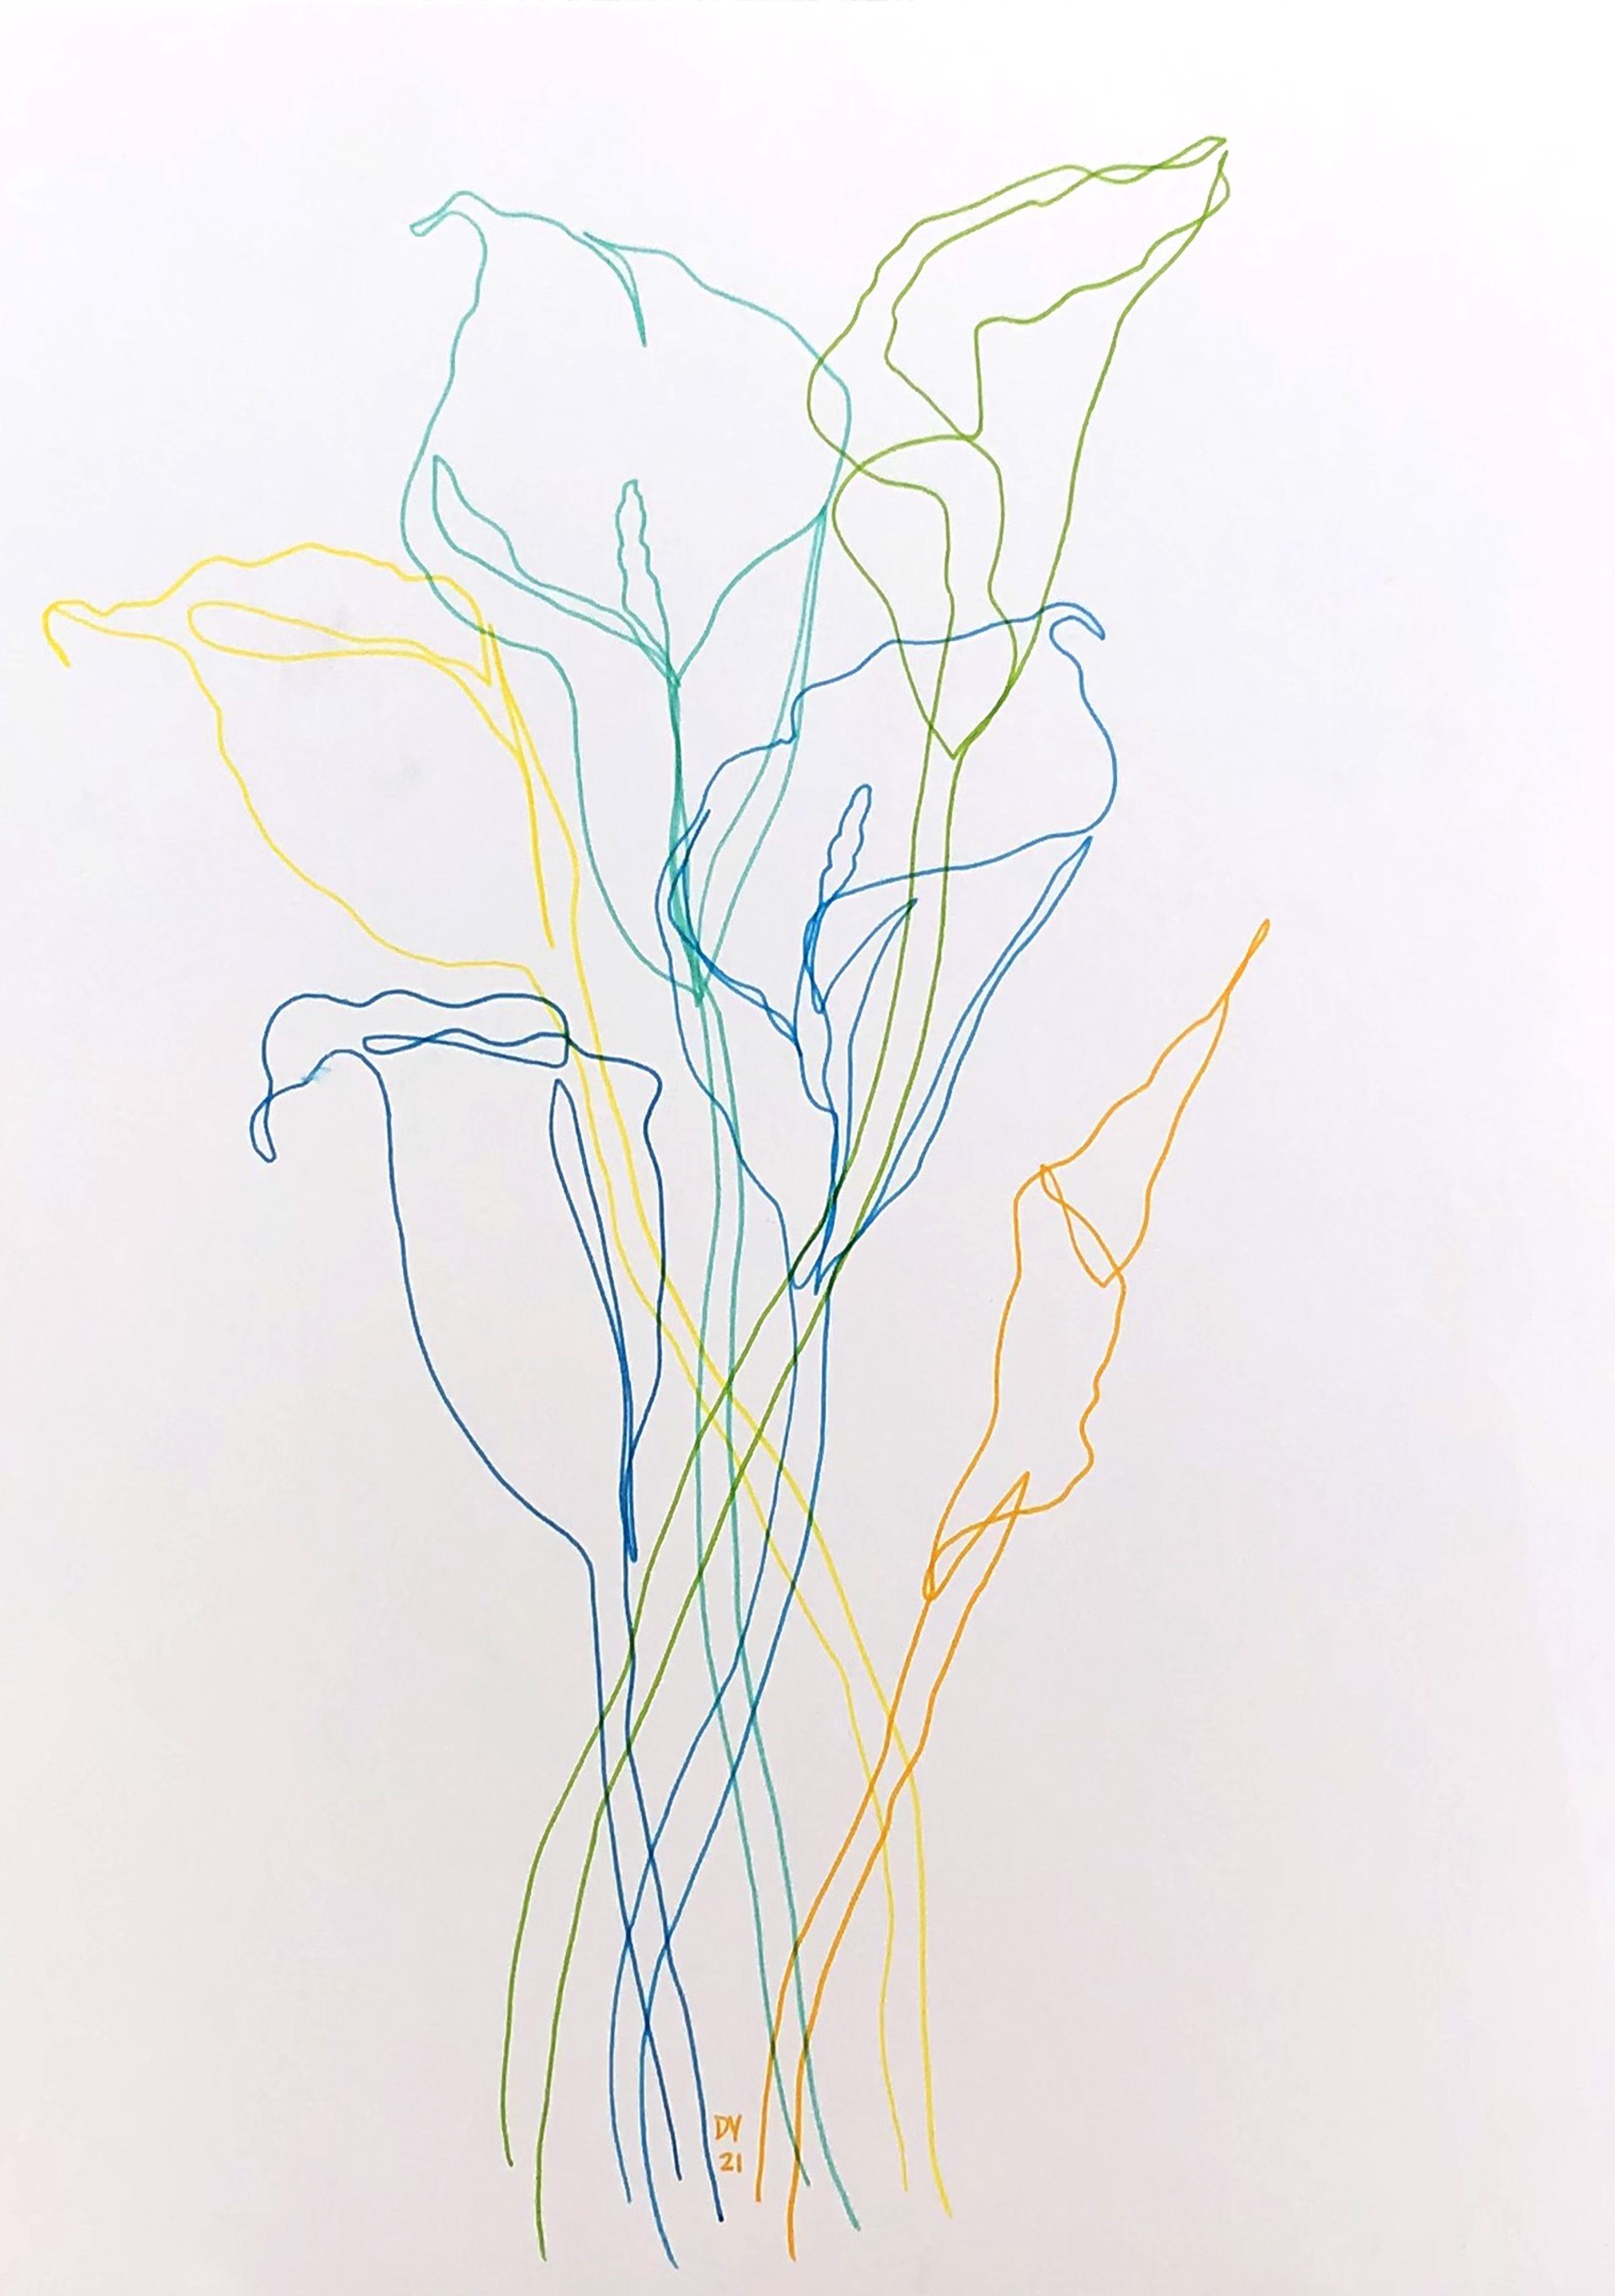 Floral Lines in Color I by Dustin Young